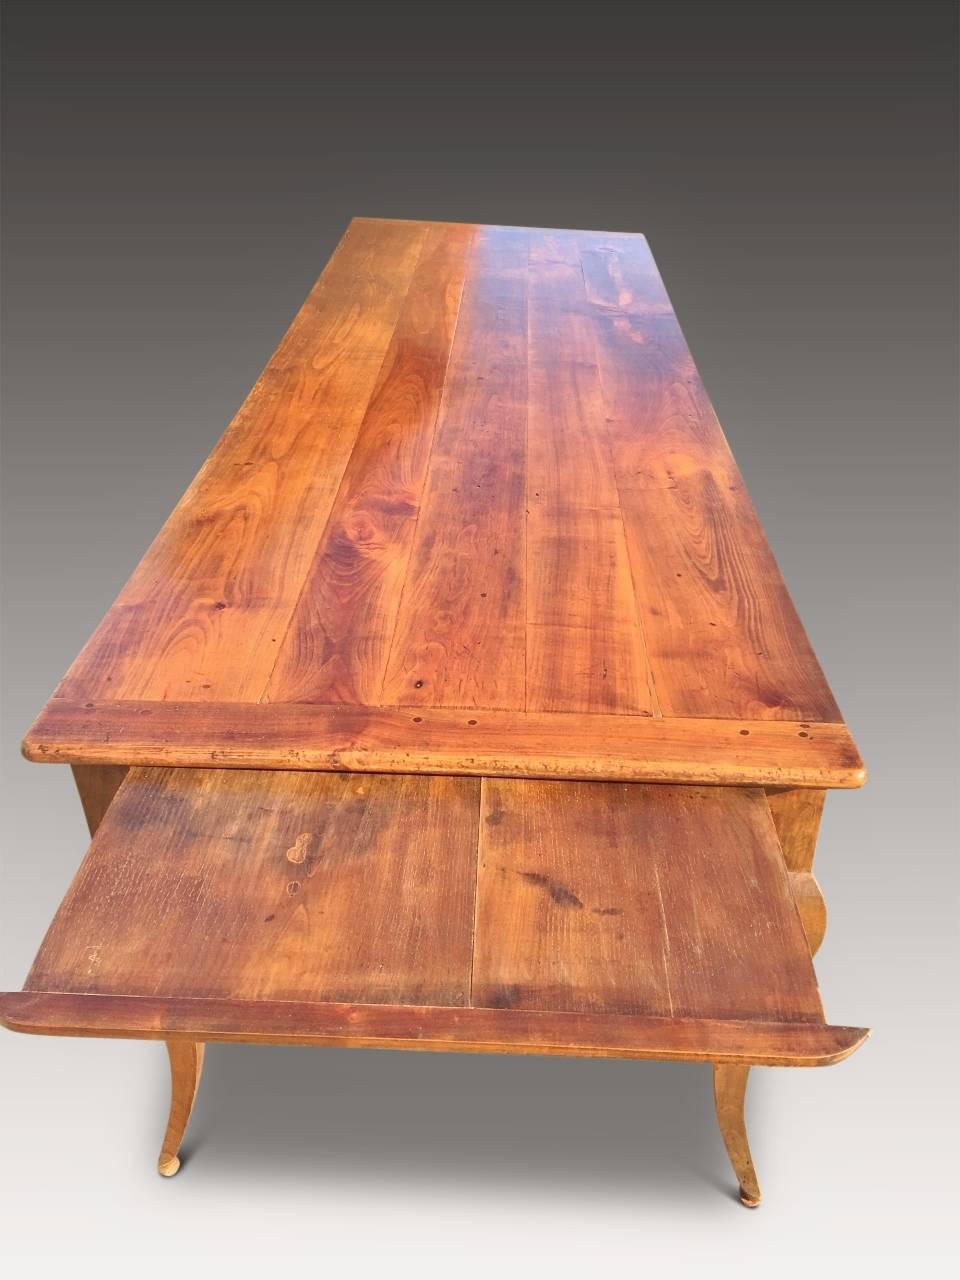 Fabulous large French cherry wood dining table, dated to about  1860. It seats 10 to 12 people comfortably and has plenty of elbow and leg room with a floor to apron height of 24.5 inches. Every joint is firm and sturdy and the top is level and